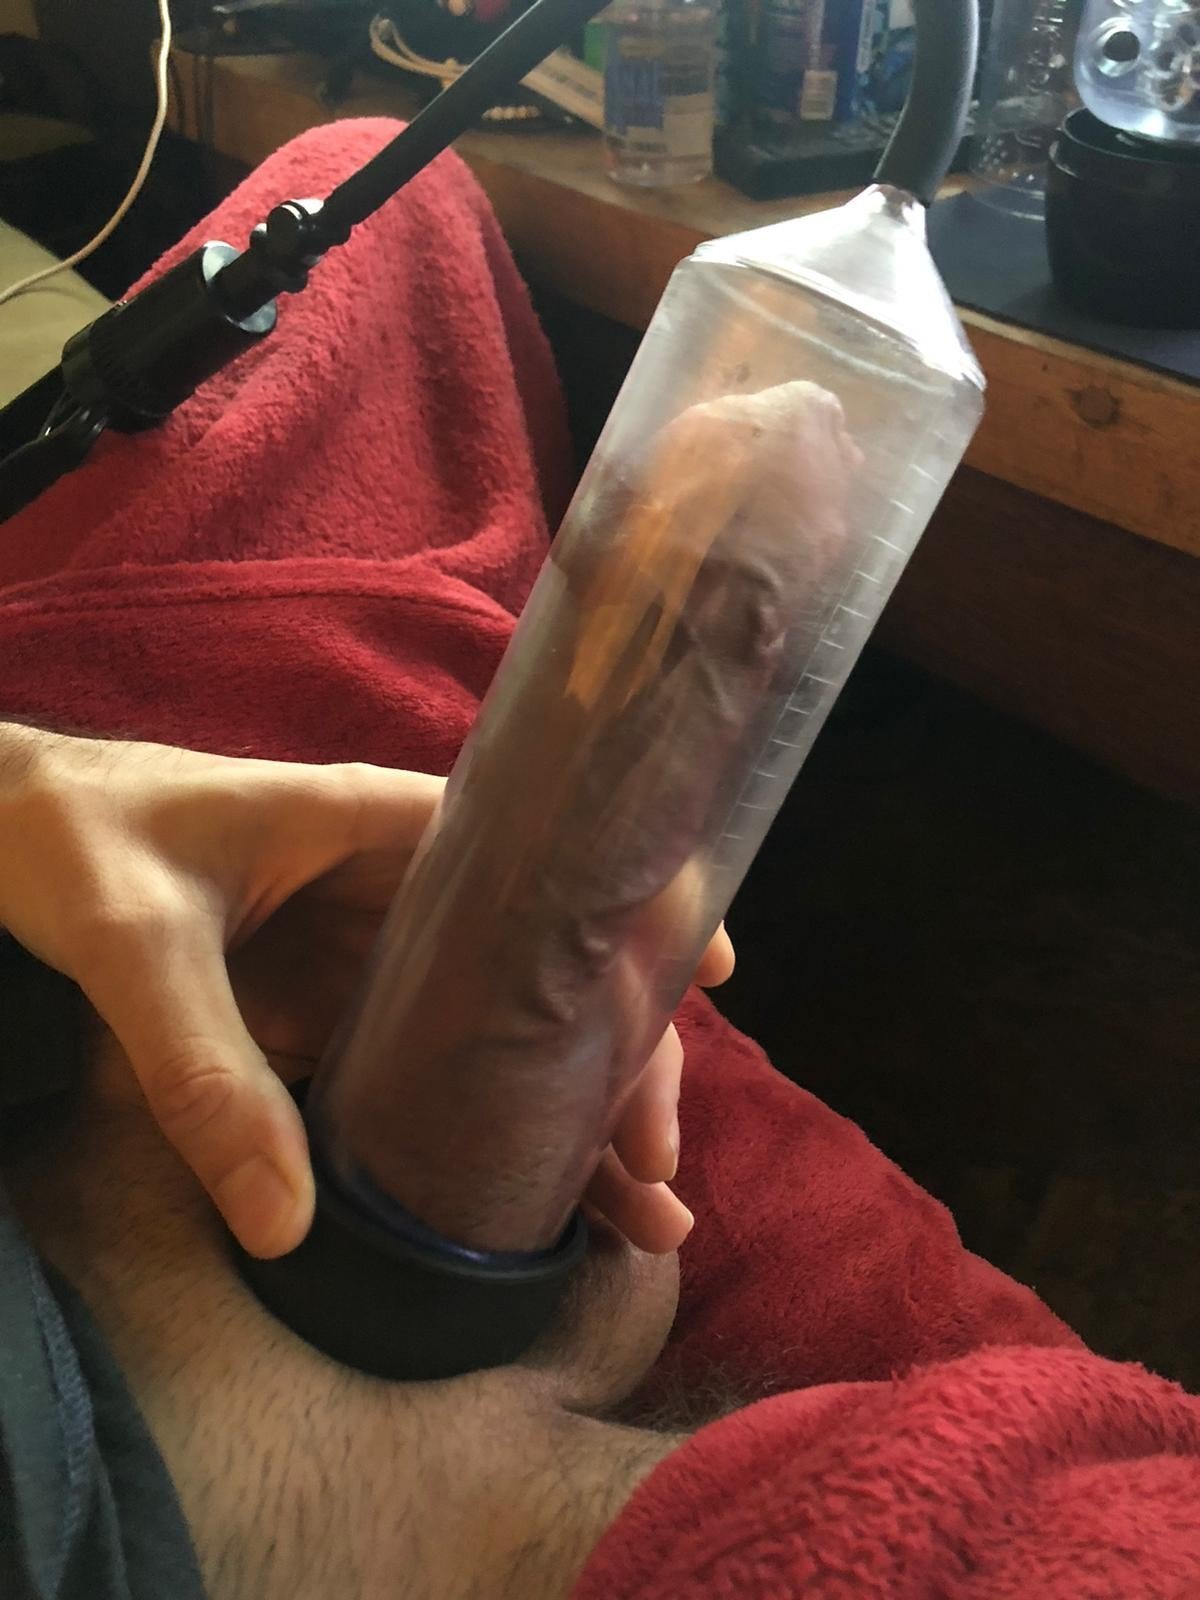 Watch the Photo by thumperog69 with the username @thumperog69, posted on August 10, 2022. The post is about the topic Rate my pussy or dick.